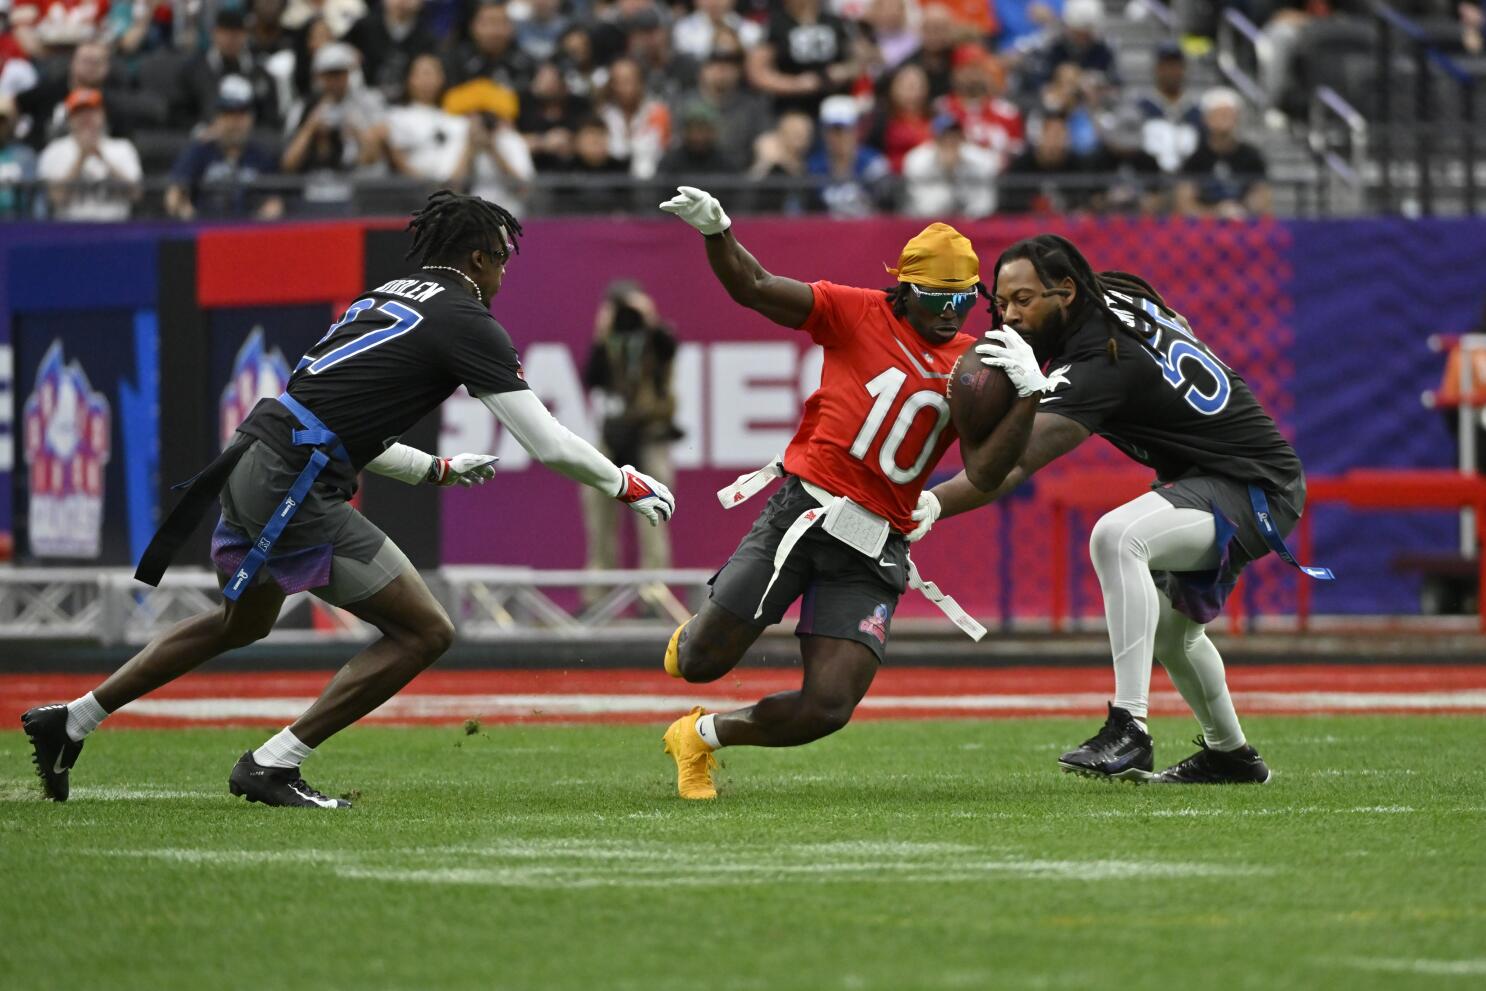 Olympics set to tackle flag football at Los Angeles Olympics in 2028 - The  San Diego Union-Tribune